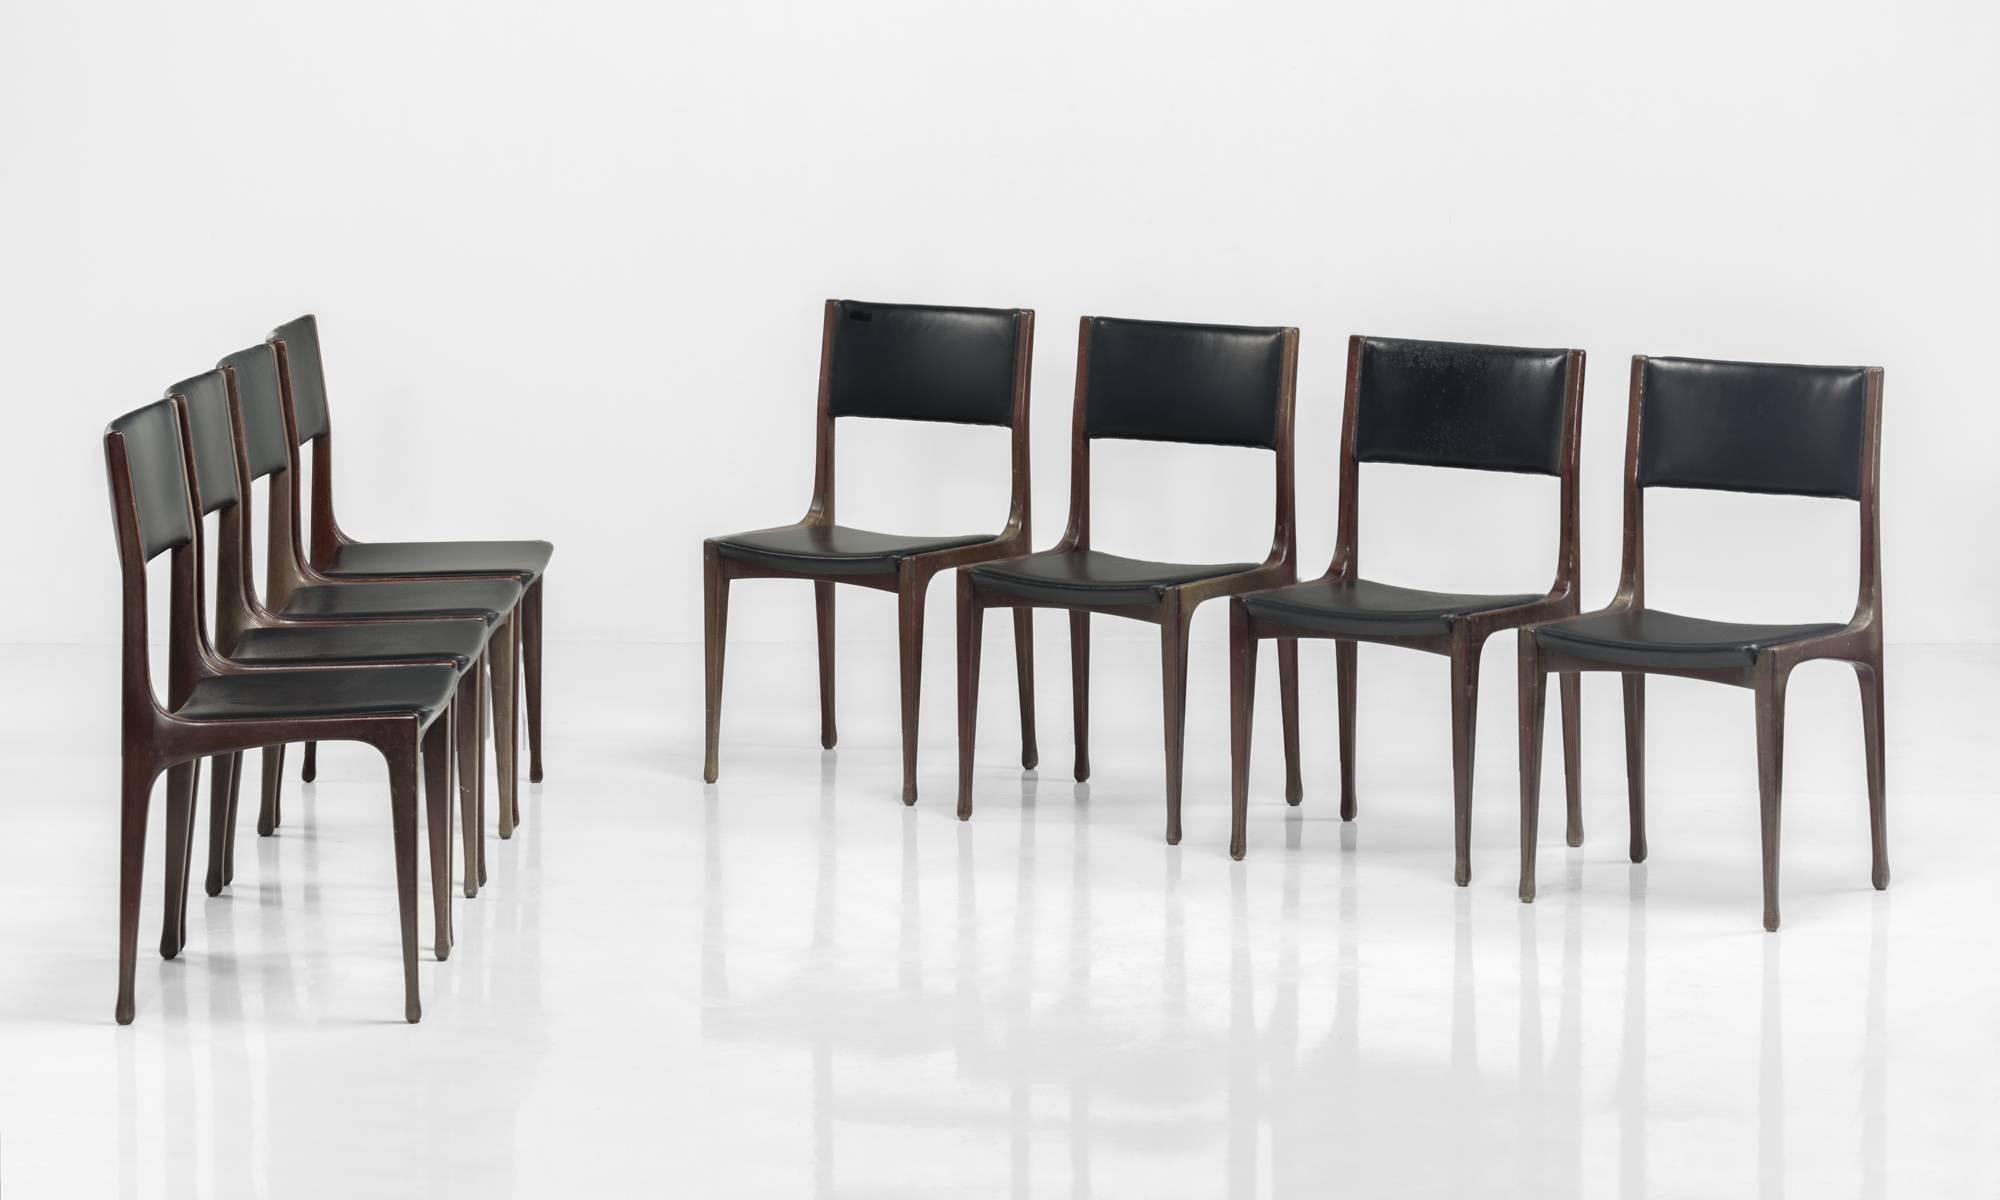 Model 693 Dining Chairs, designed by Carlo di Carli for Cassina. 

Original black vinyl upholstery on elegant wooden frame.